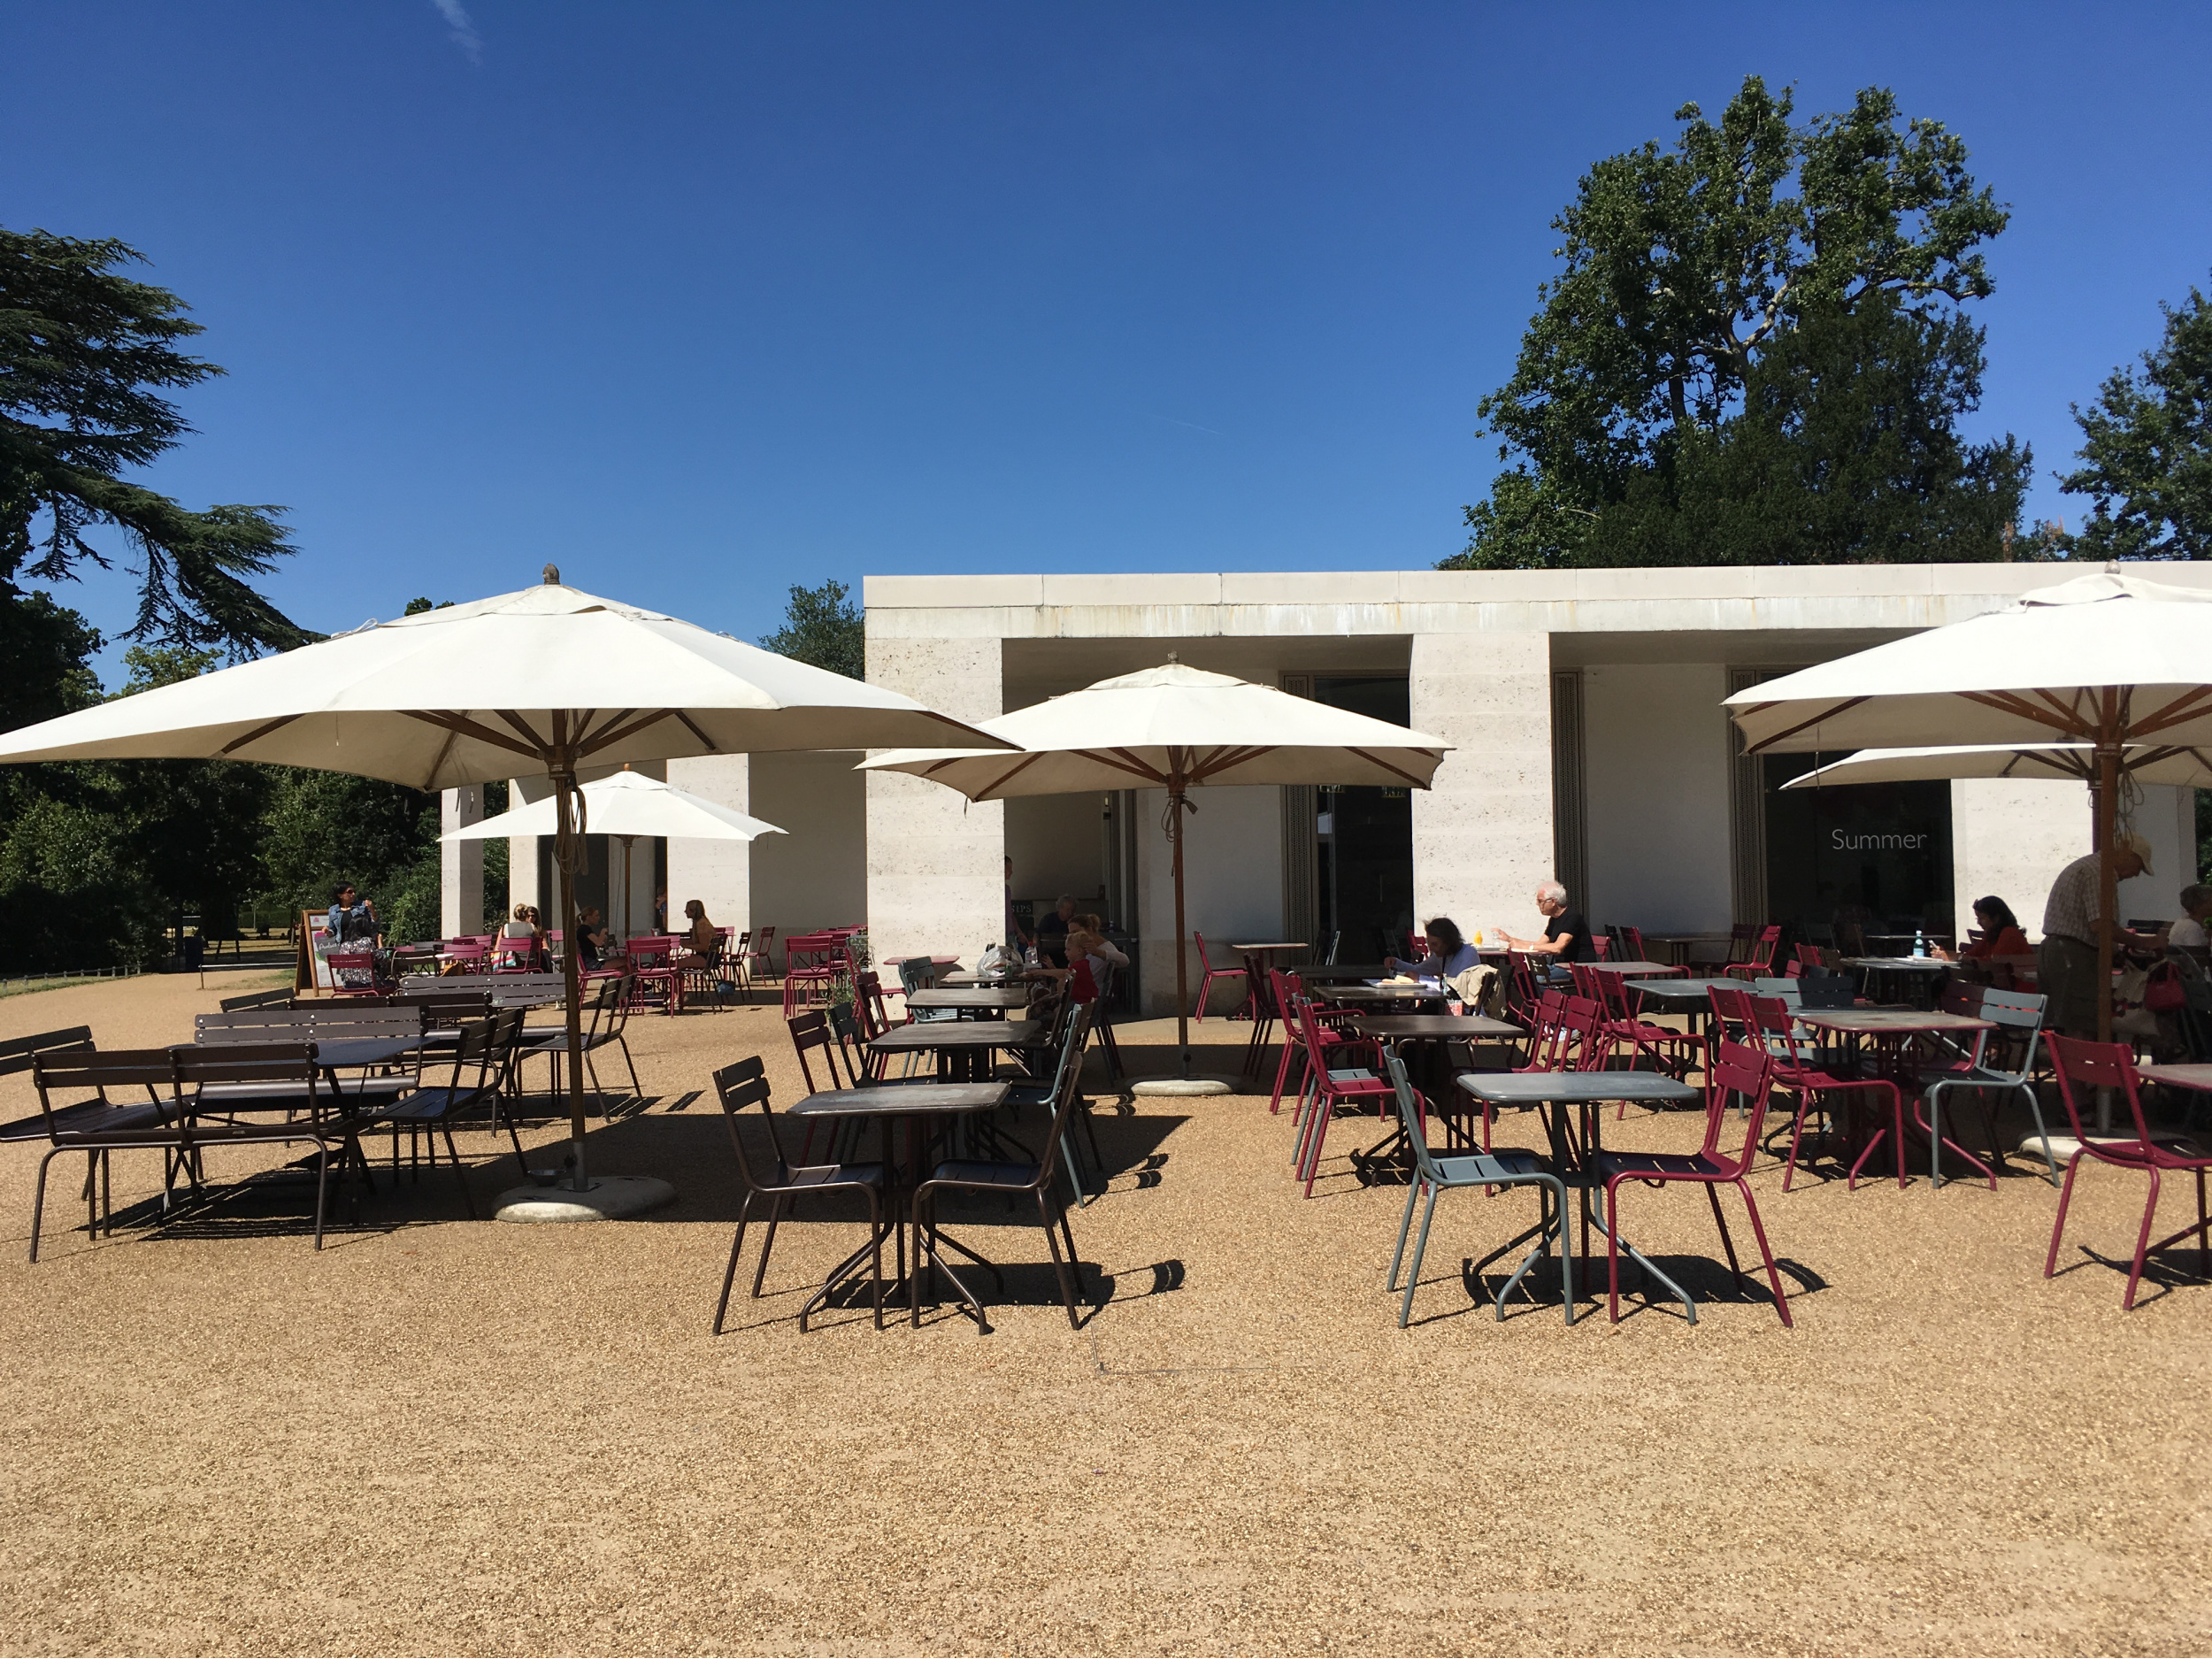 Chiswick House Cafe, London outdoor space